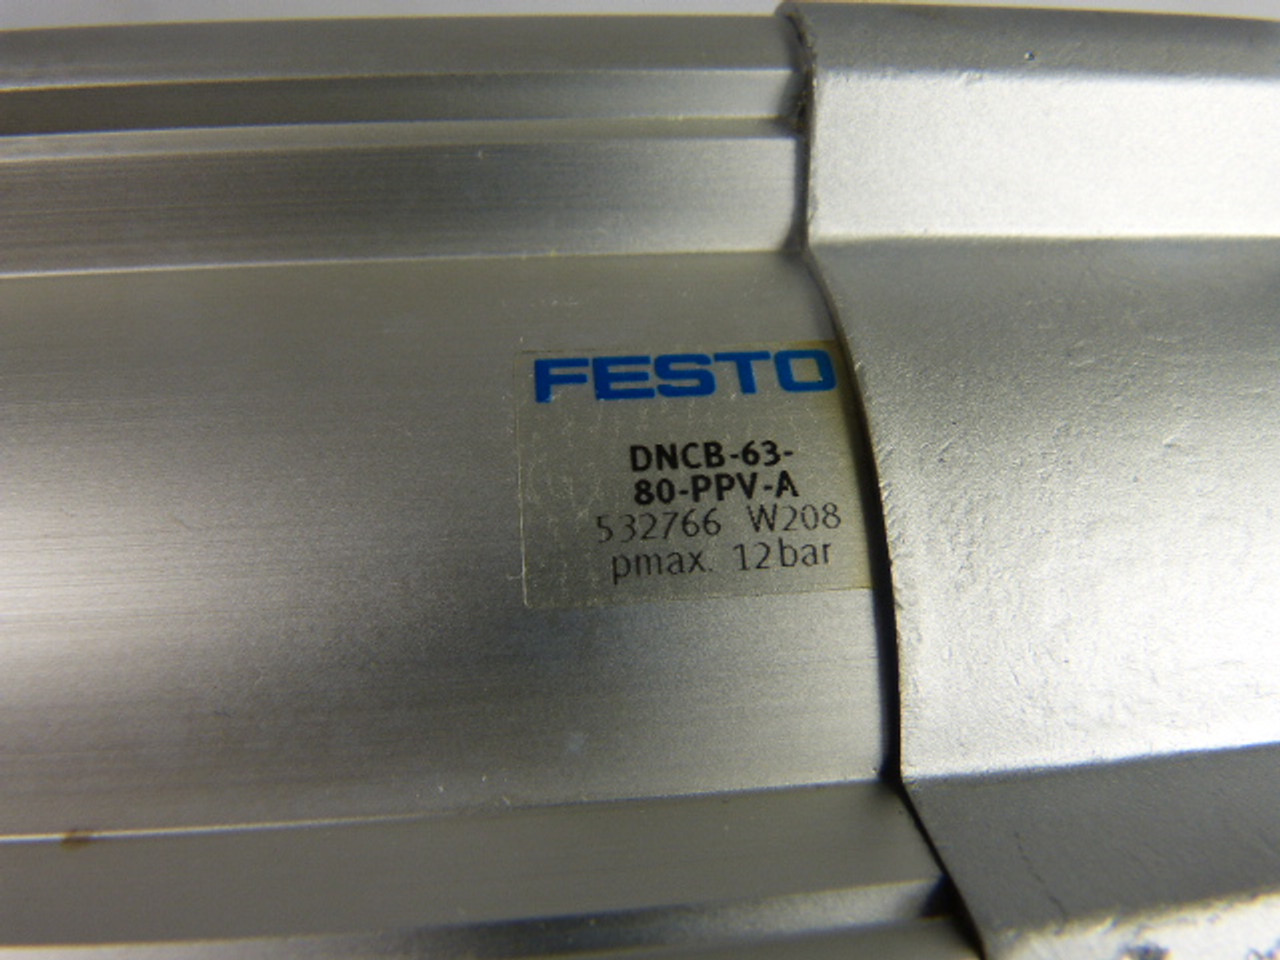 Festo DNCB-63-80-PPV-A Standard Pneumatic Cylinder 532766 USED